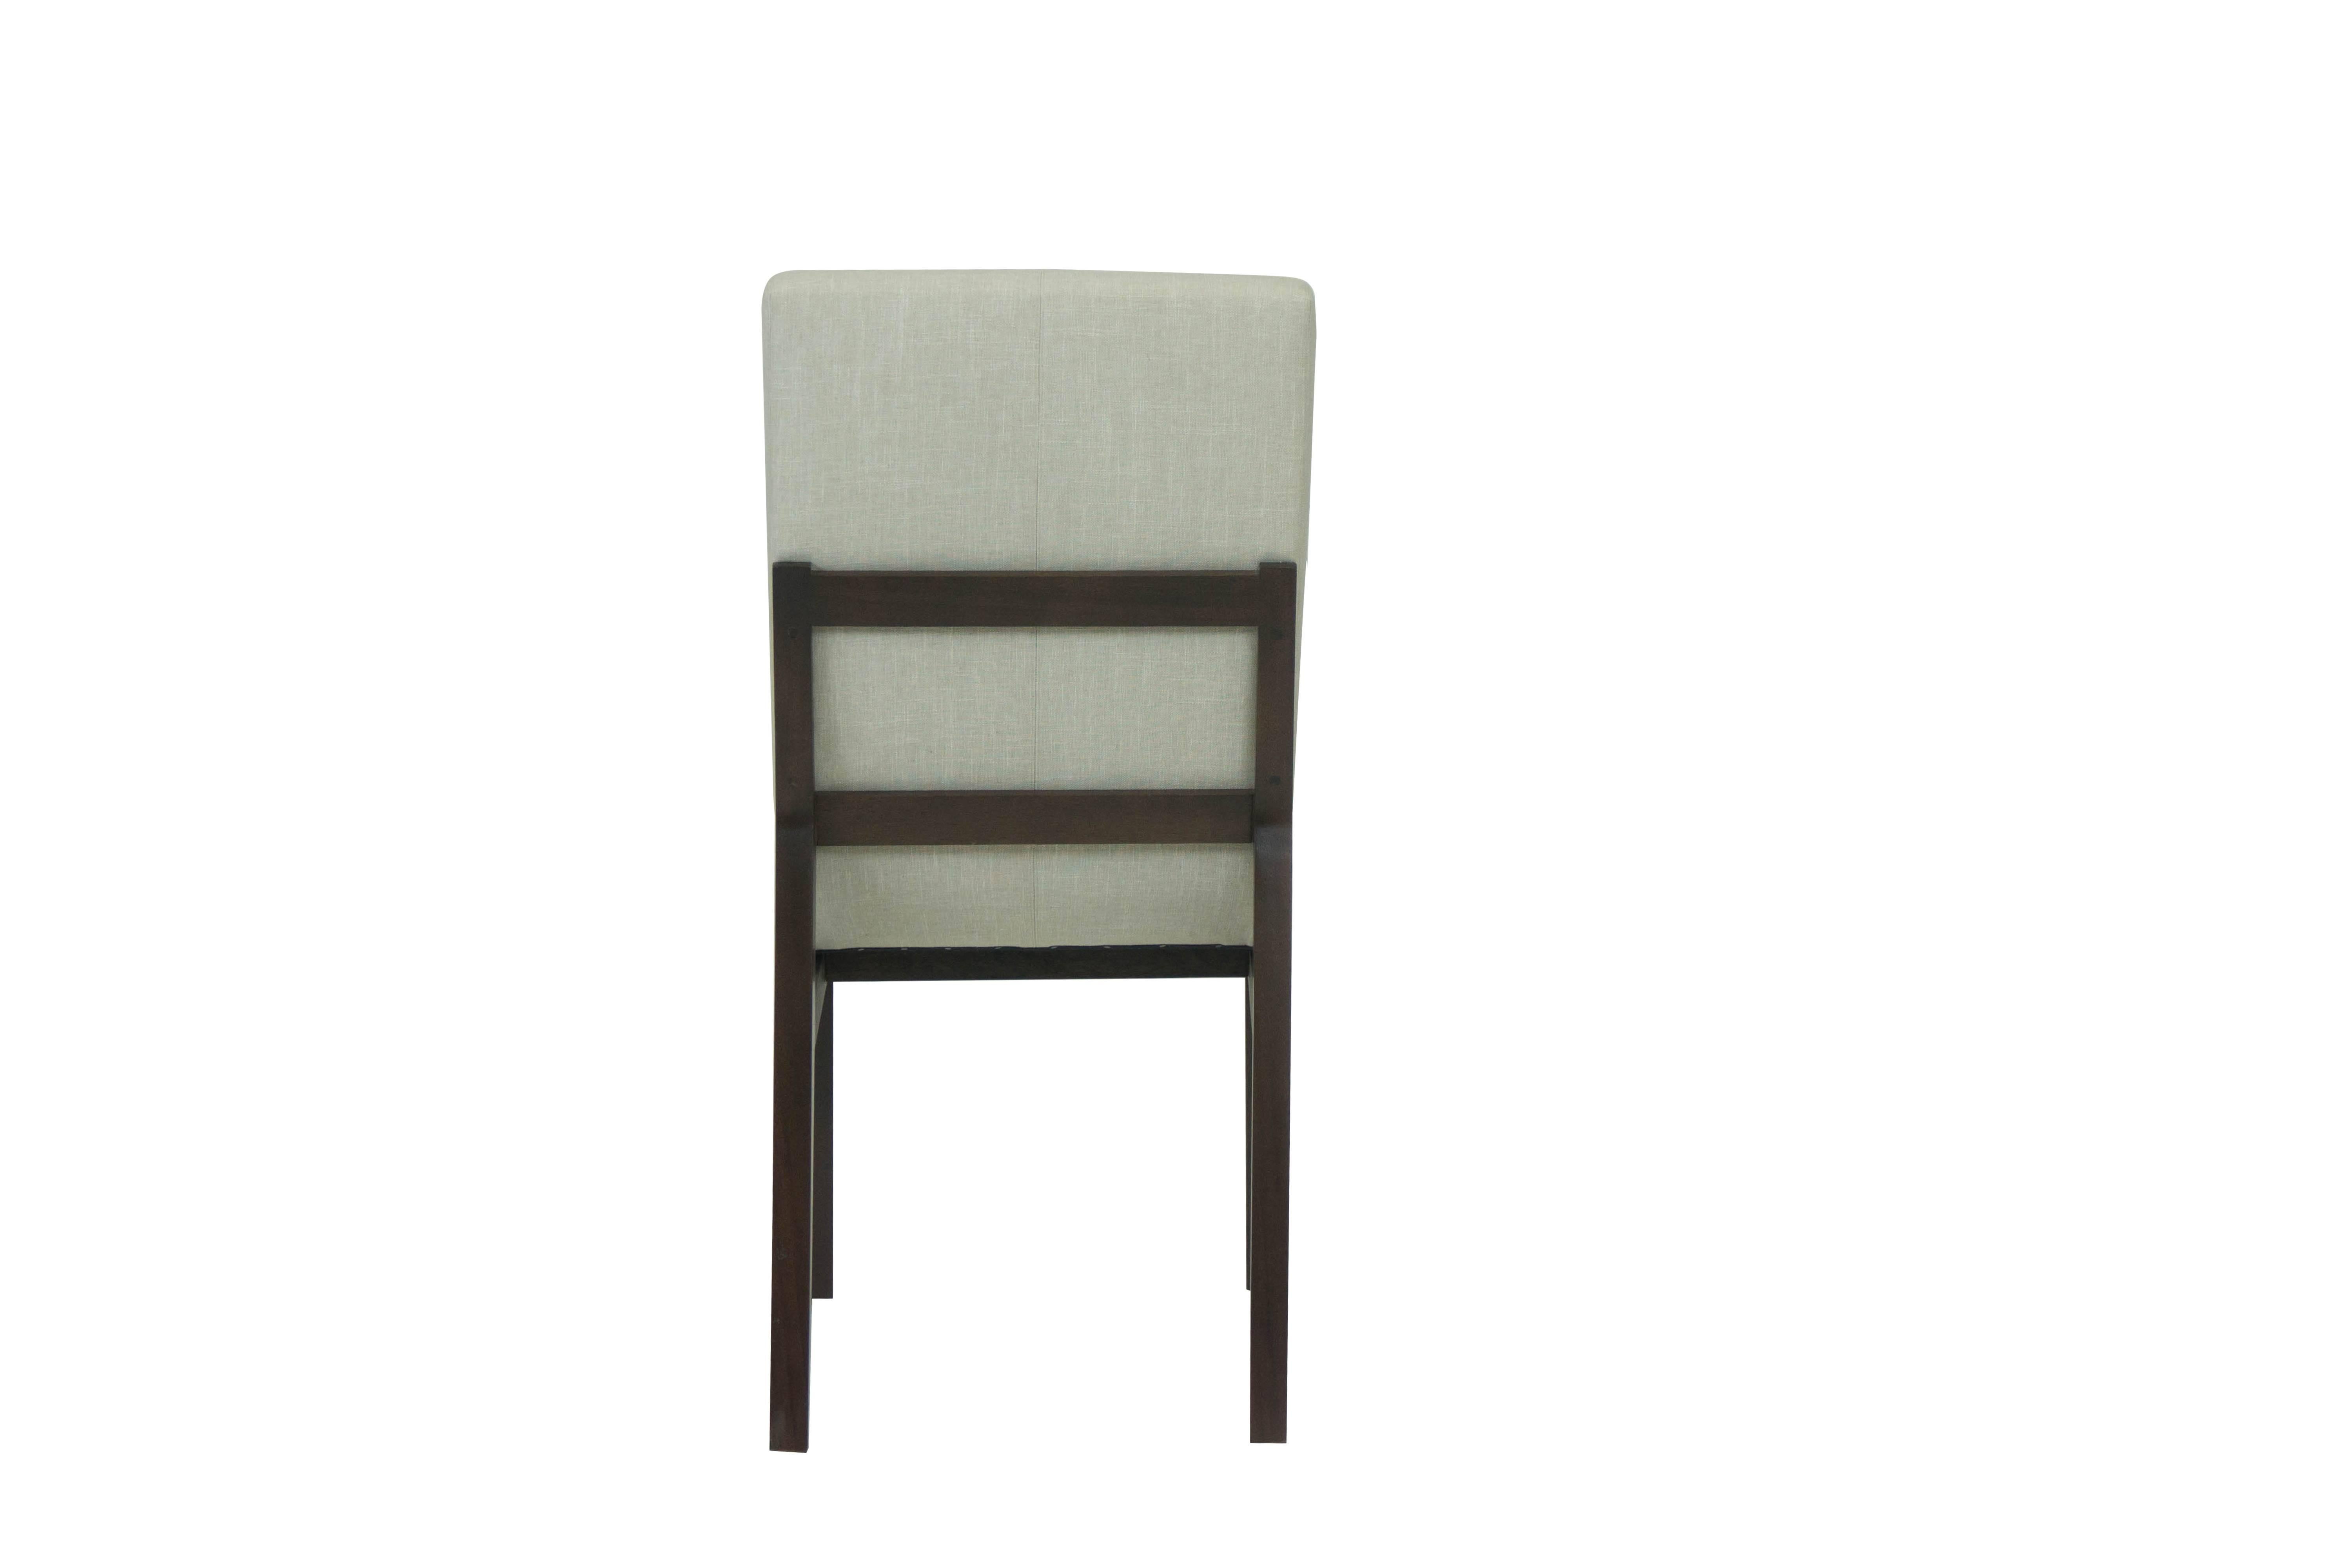 The principal feature of this dining chair is its reclined shape. Typically, dining chairs are meant to keep us upright and in 